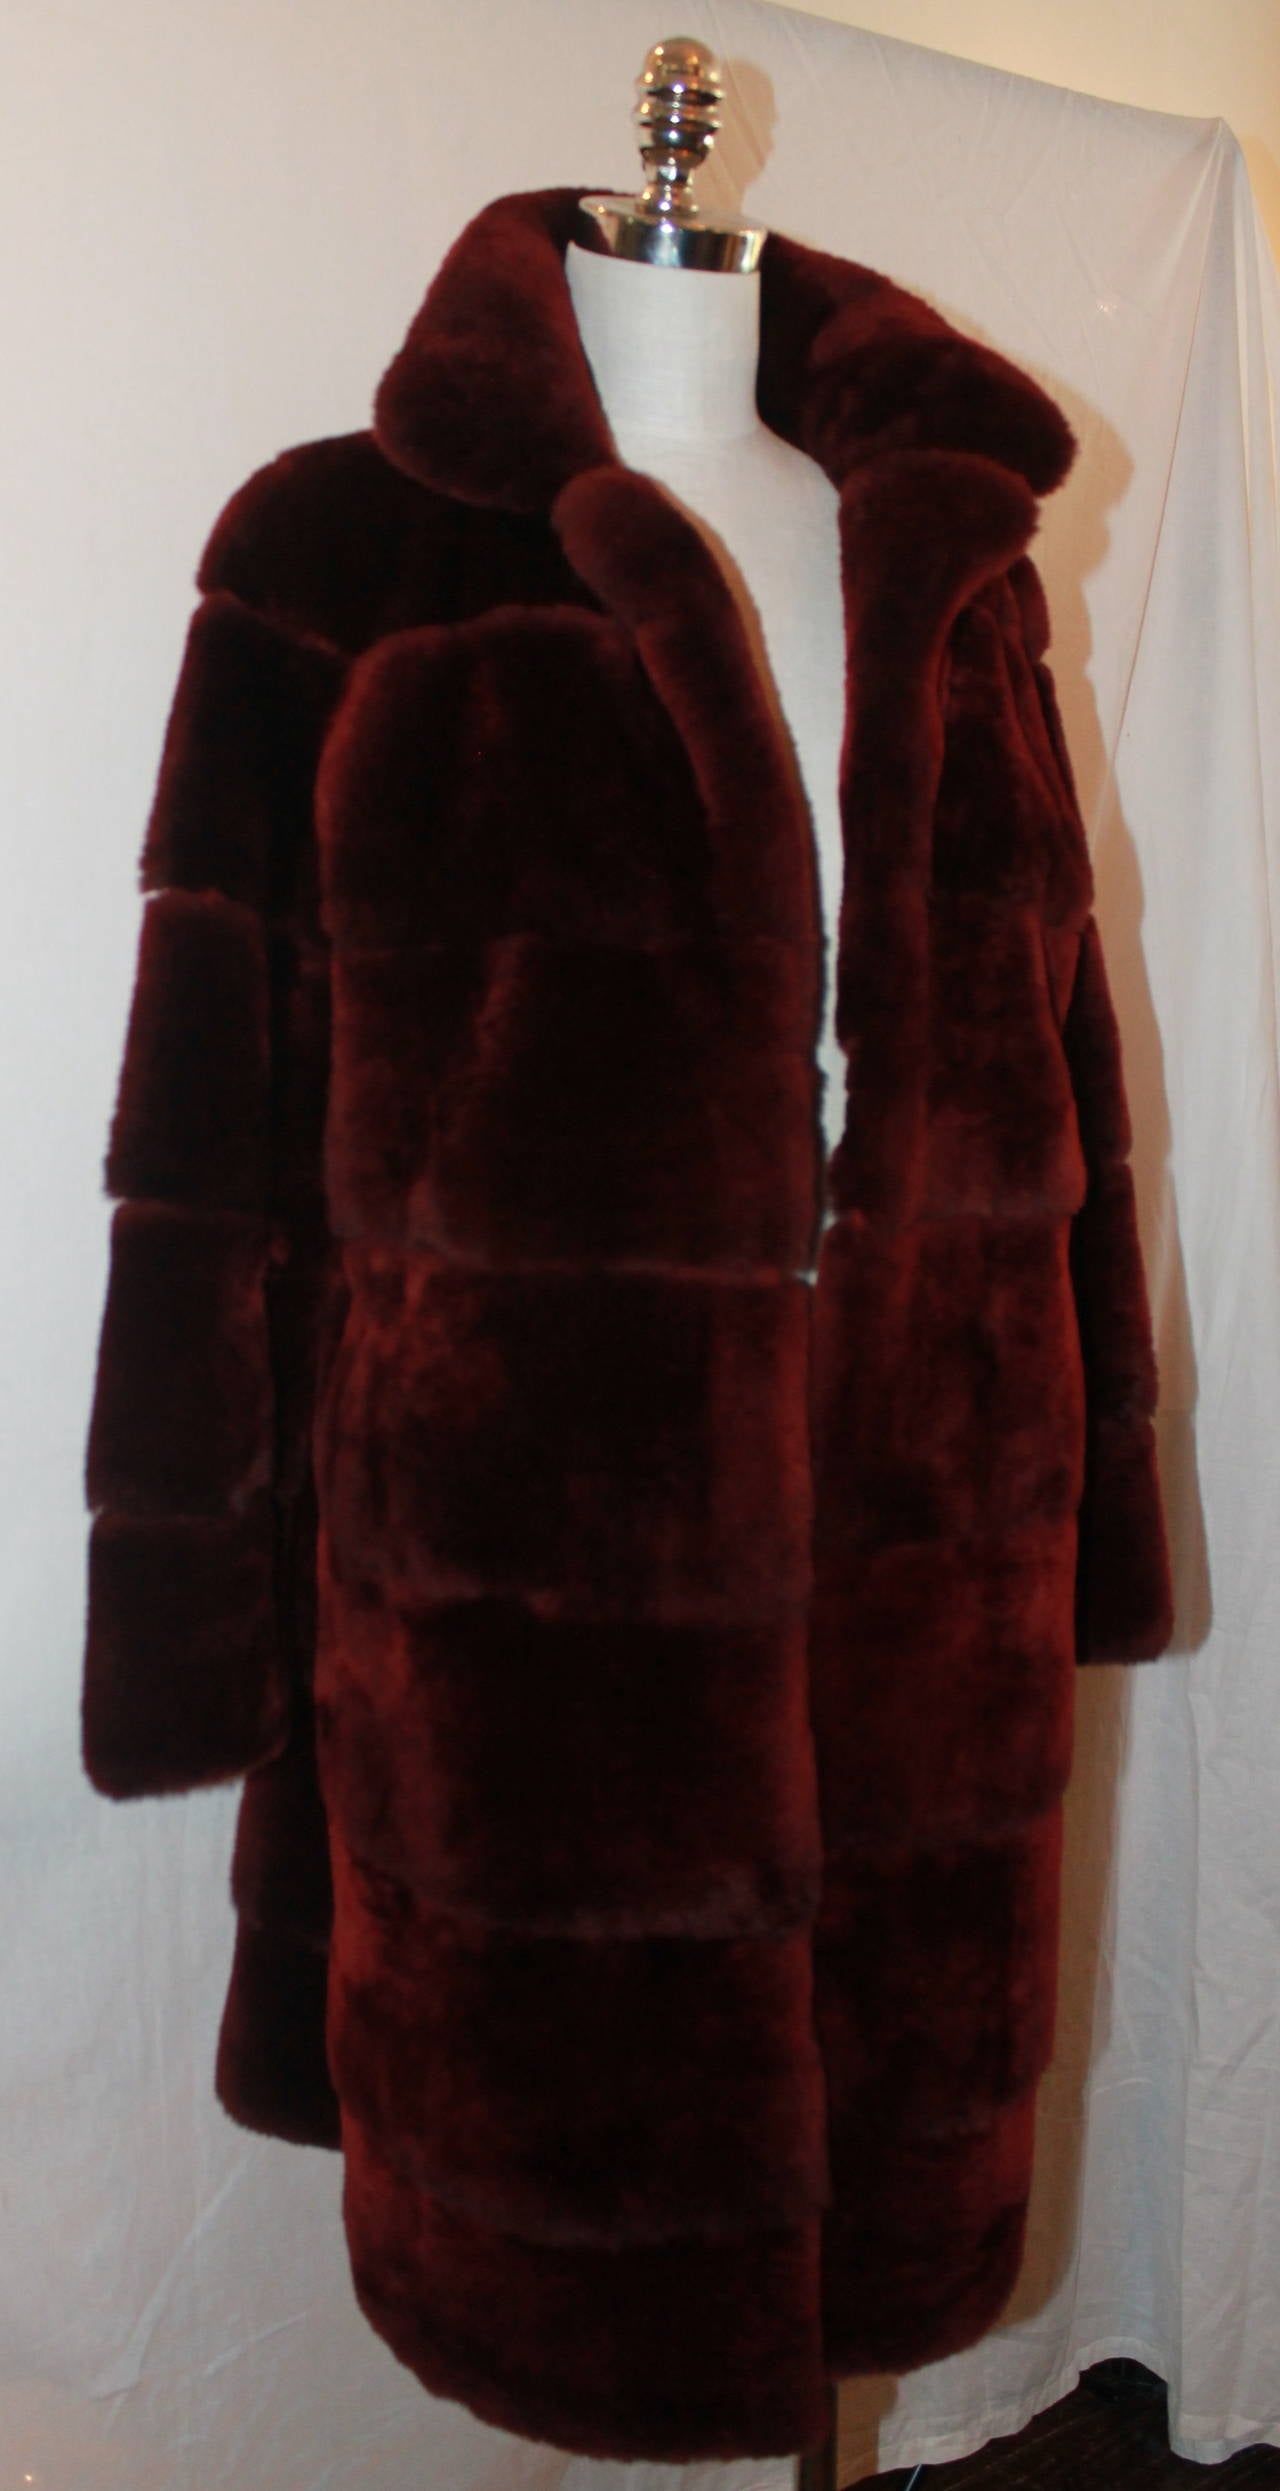 Olivia Preckel Burgundy Beaver Fur Coat - New - M. This coat has never been worn and has clips & pockets. 

Measurements:
Bust- 40